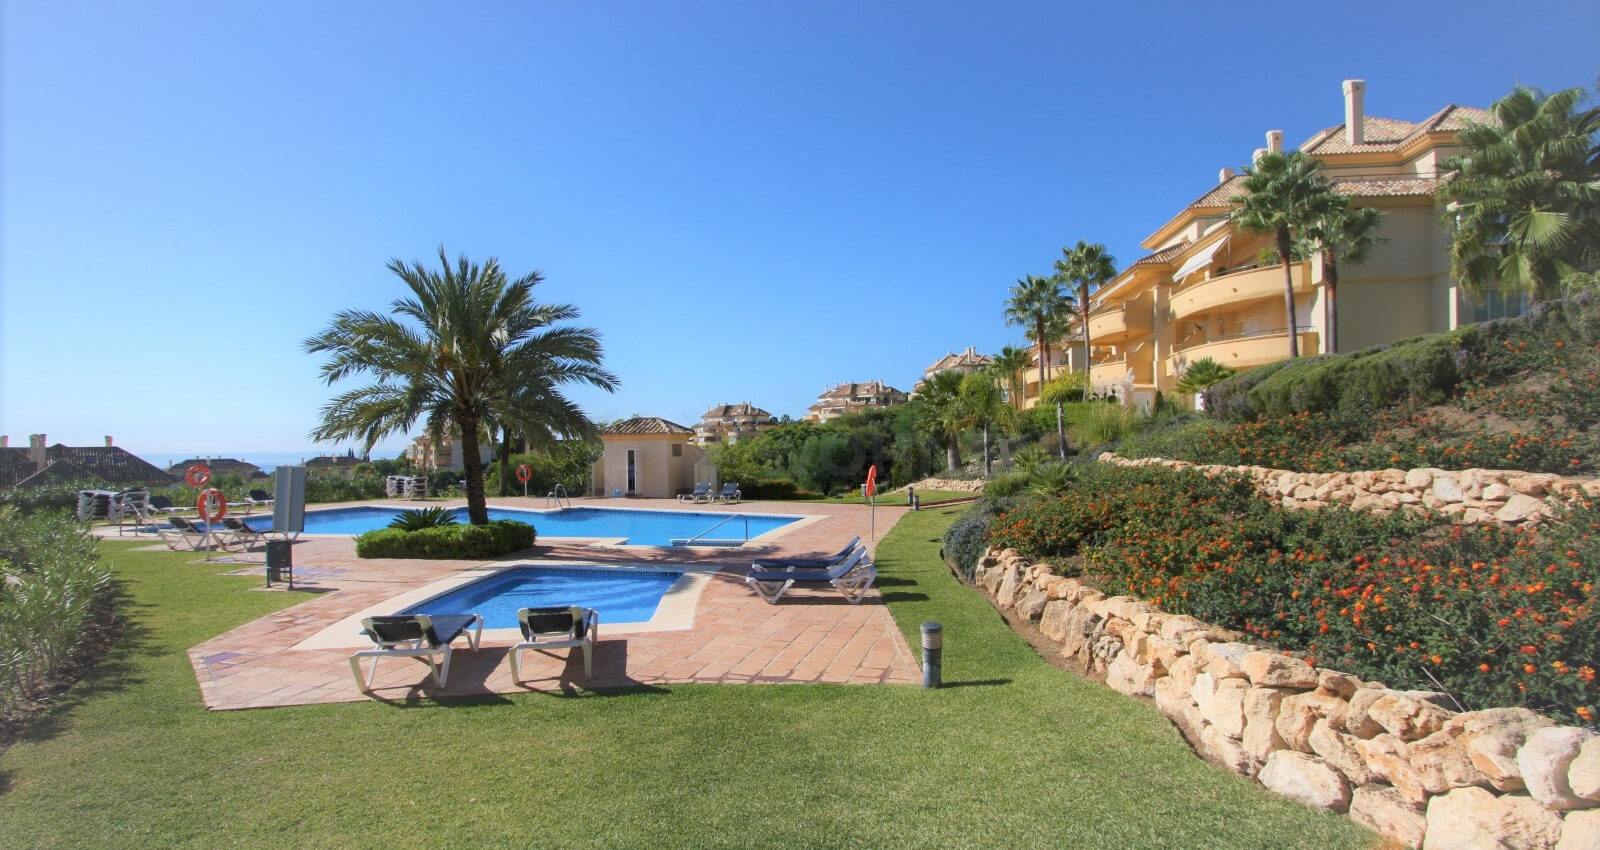 Spacious and bright ground floor apartment with sea views in Elviria Hills